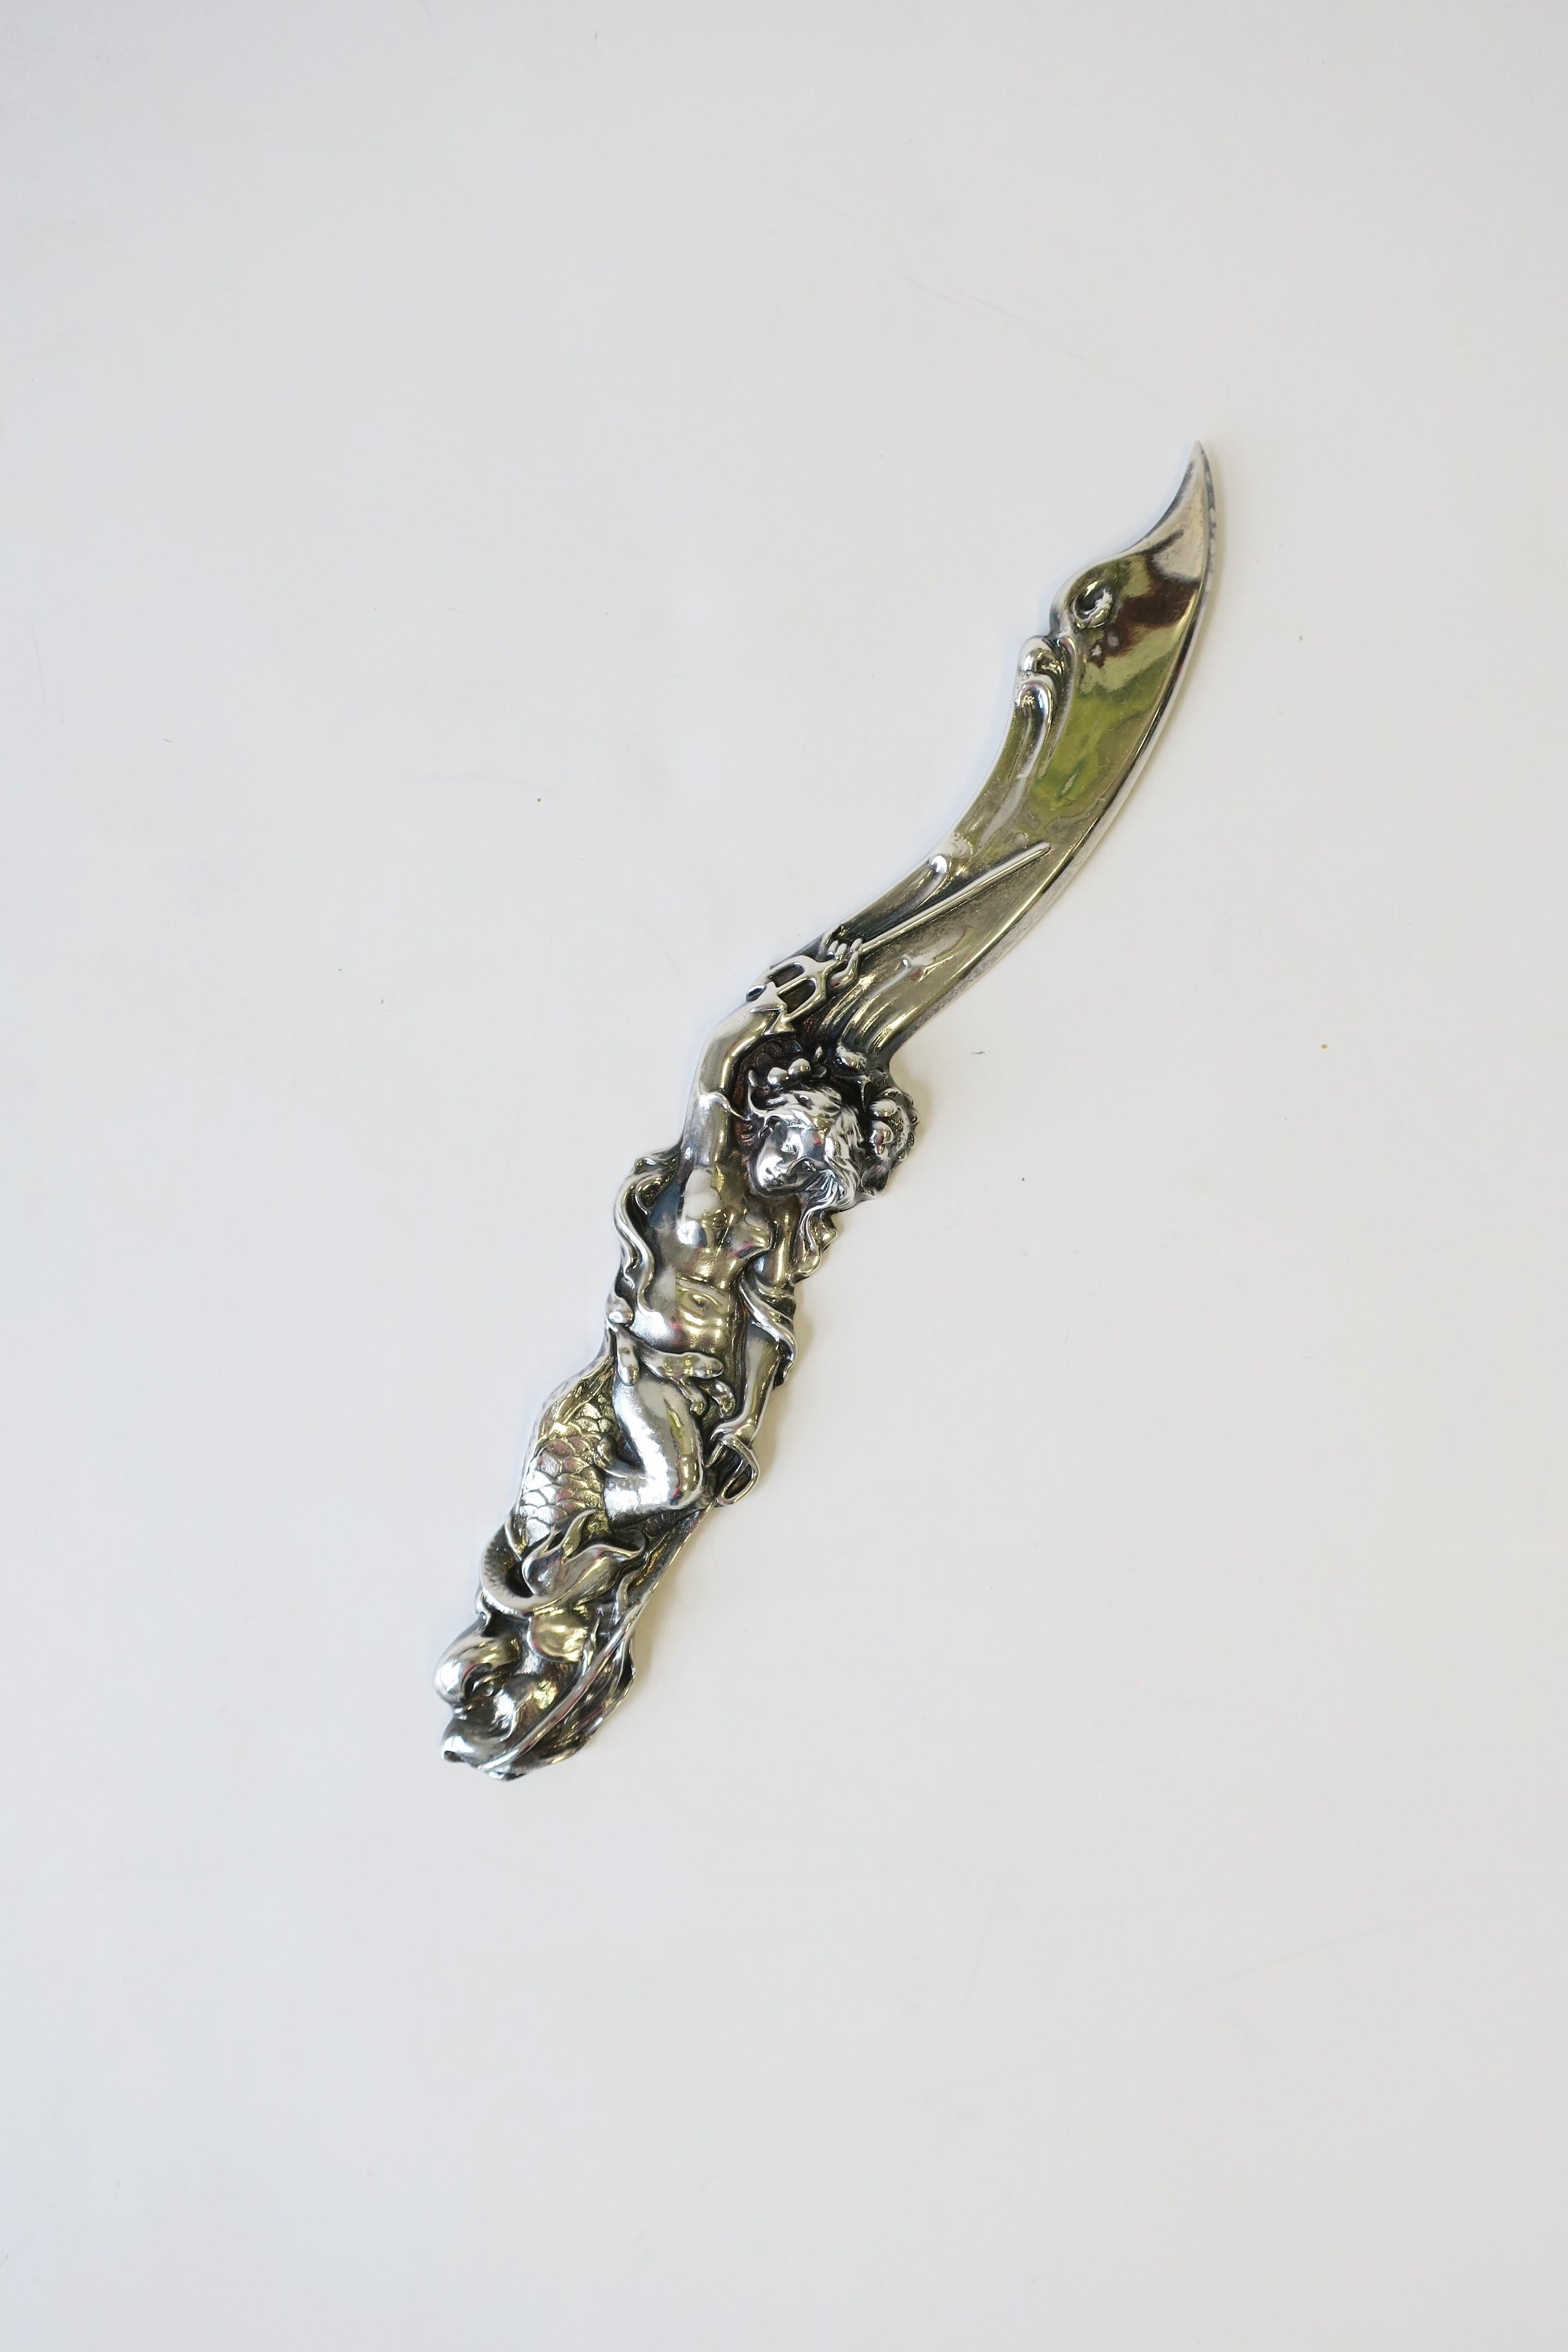 Late 20th Century Art Nouveau Letter Opener with Mermaid, 1990s